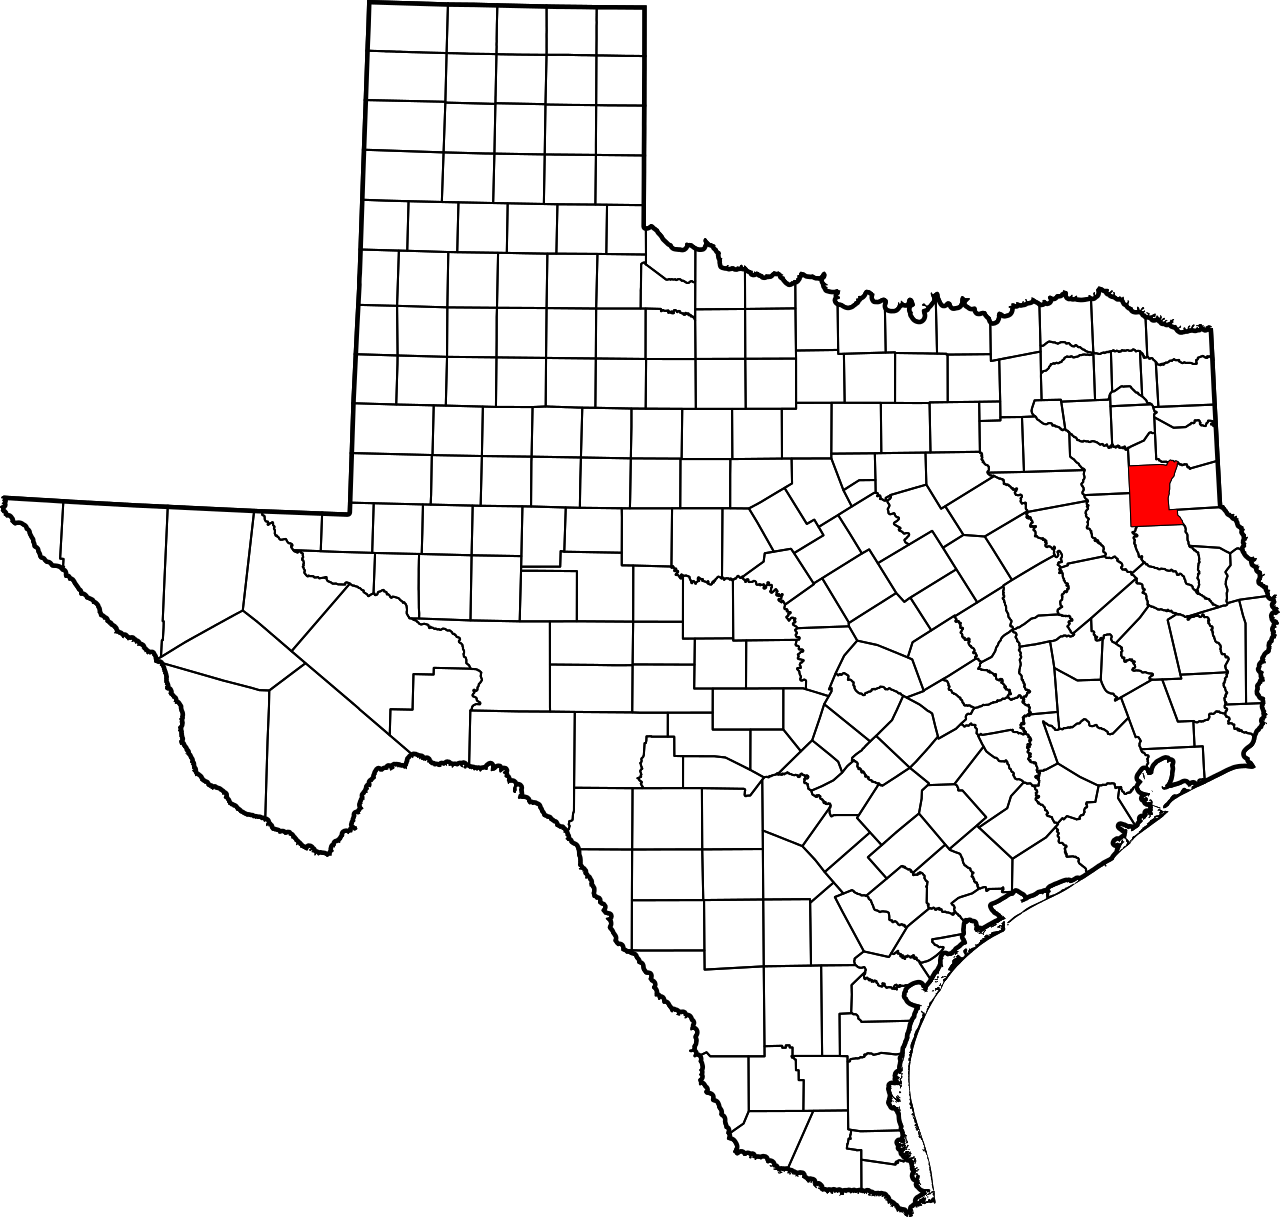 Rusk county on a map of texas counties